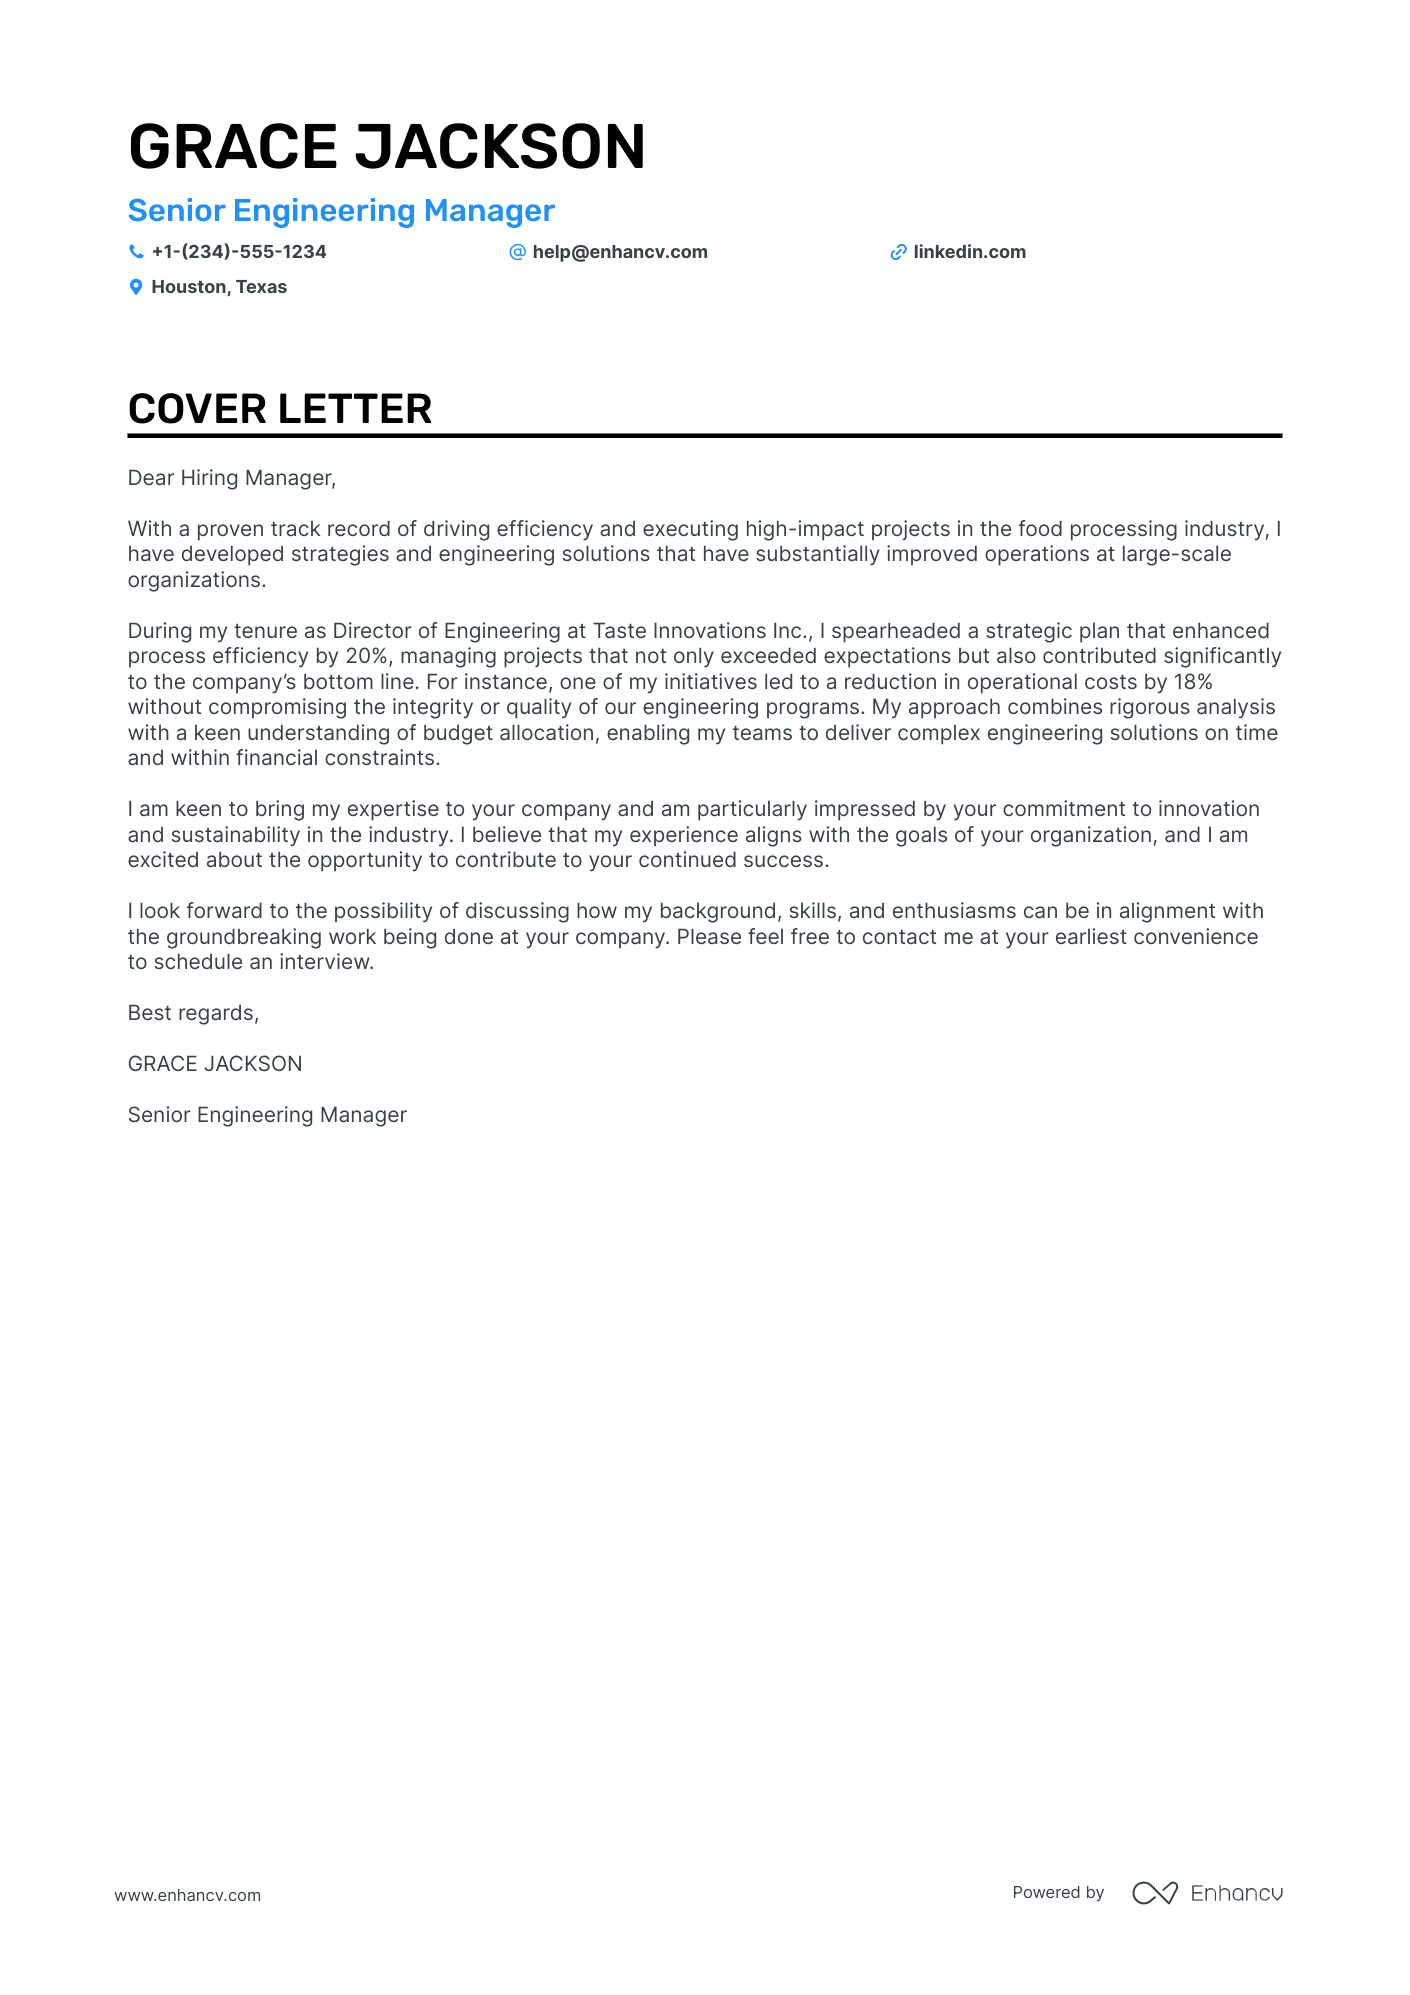 example cover letter for engineering job